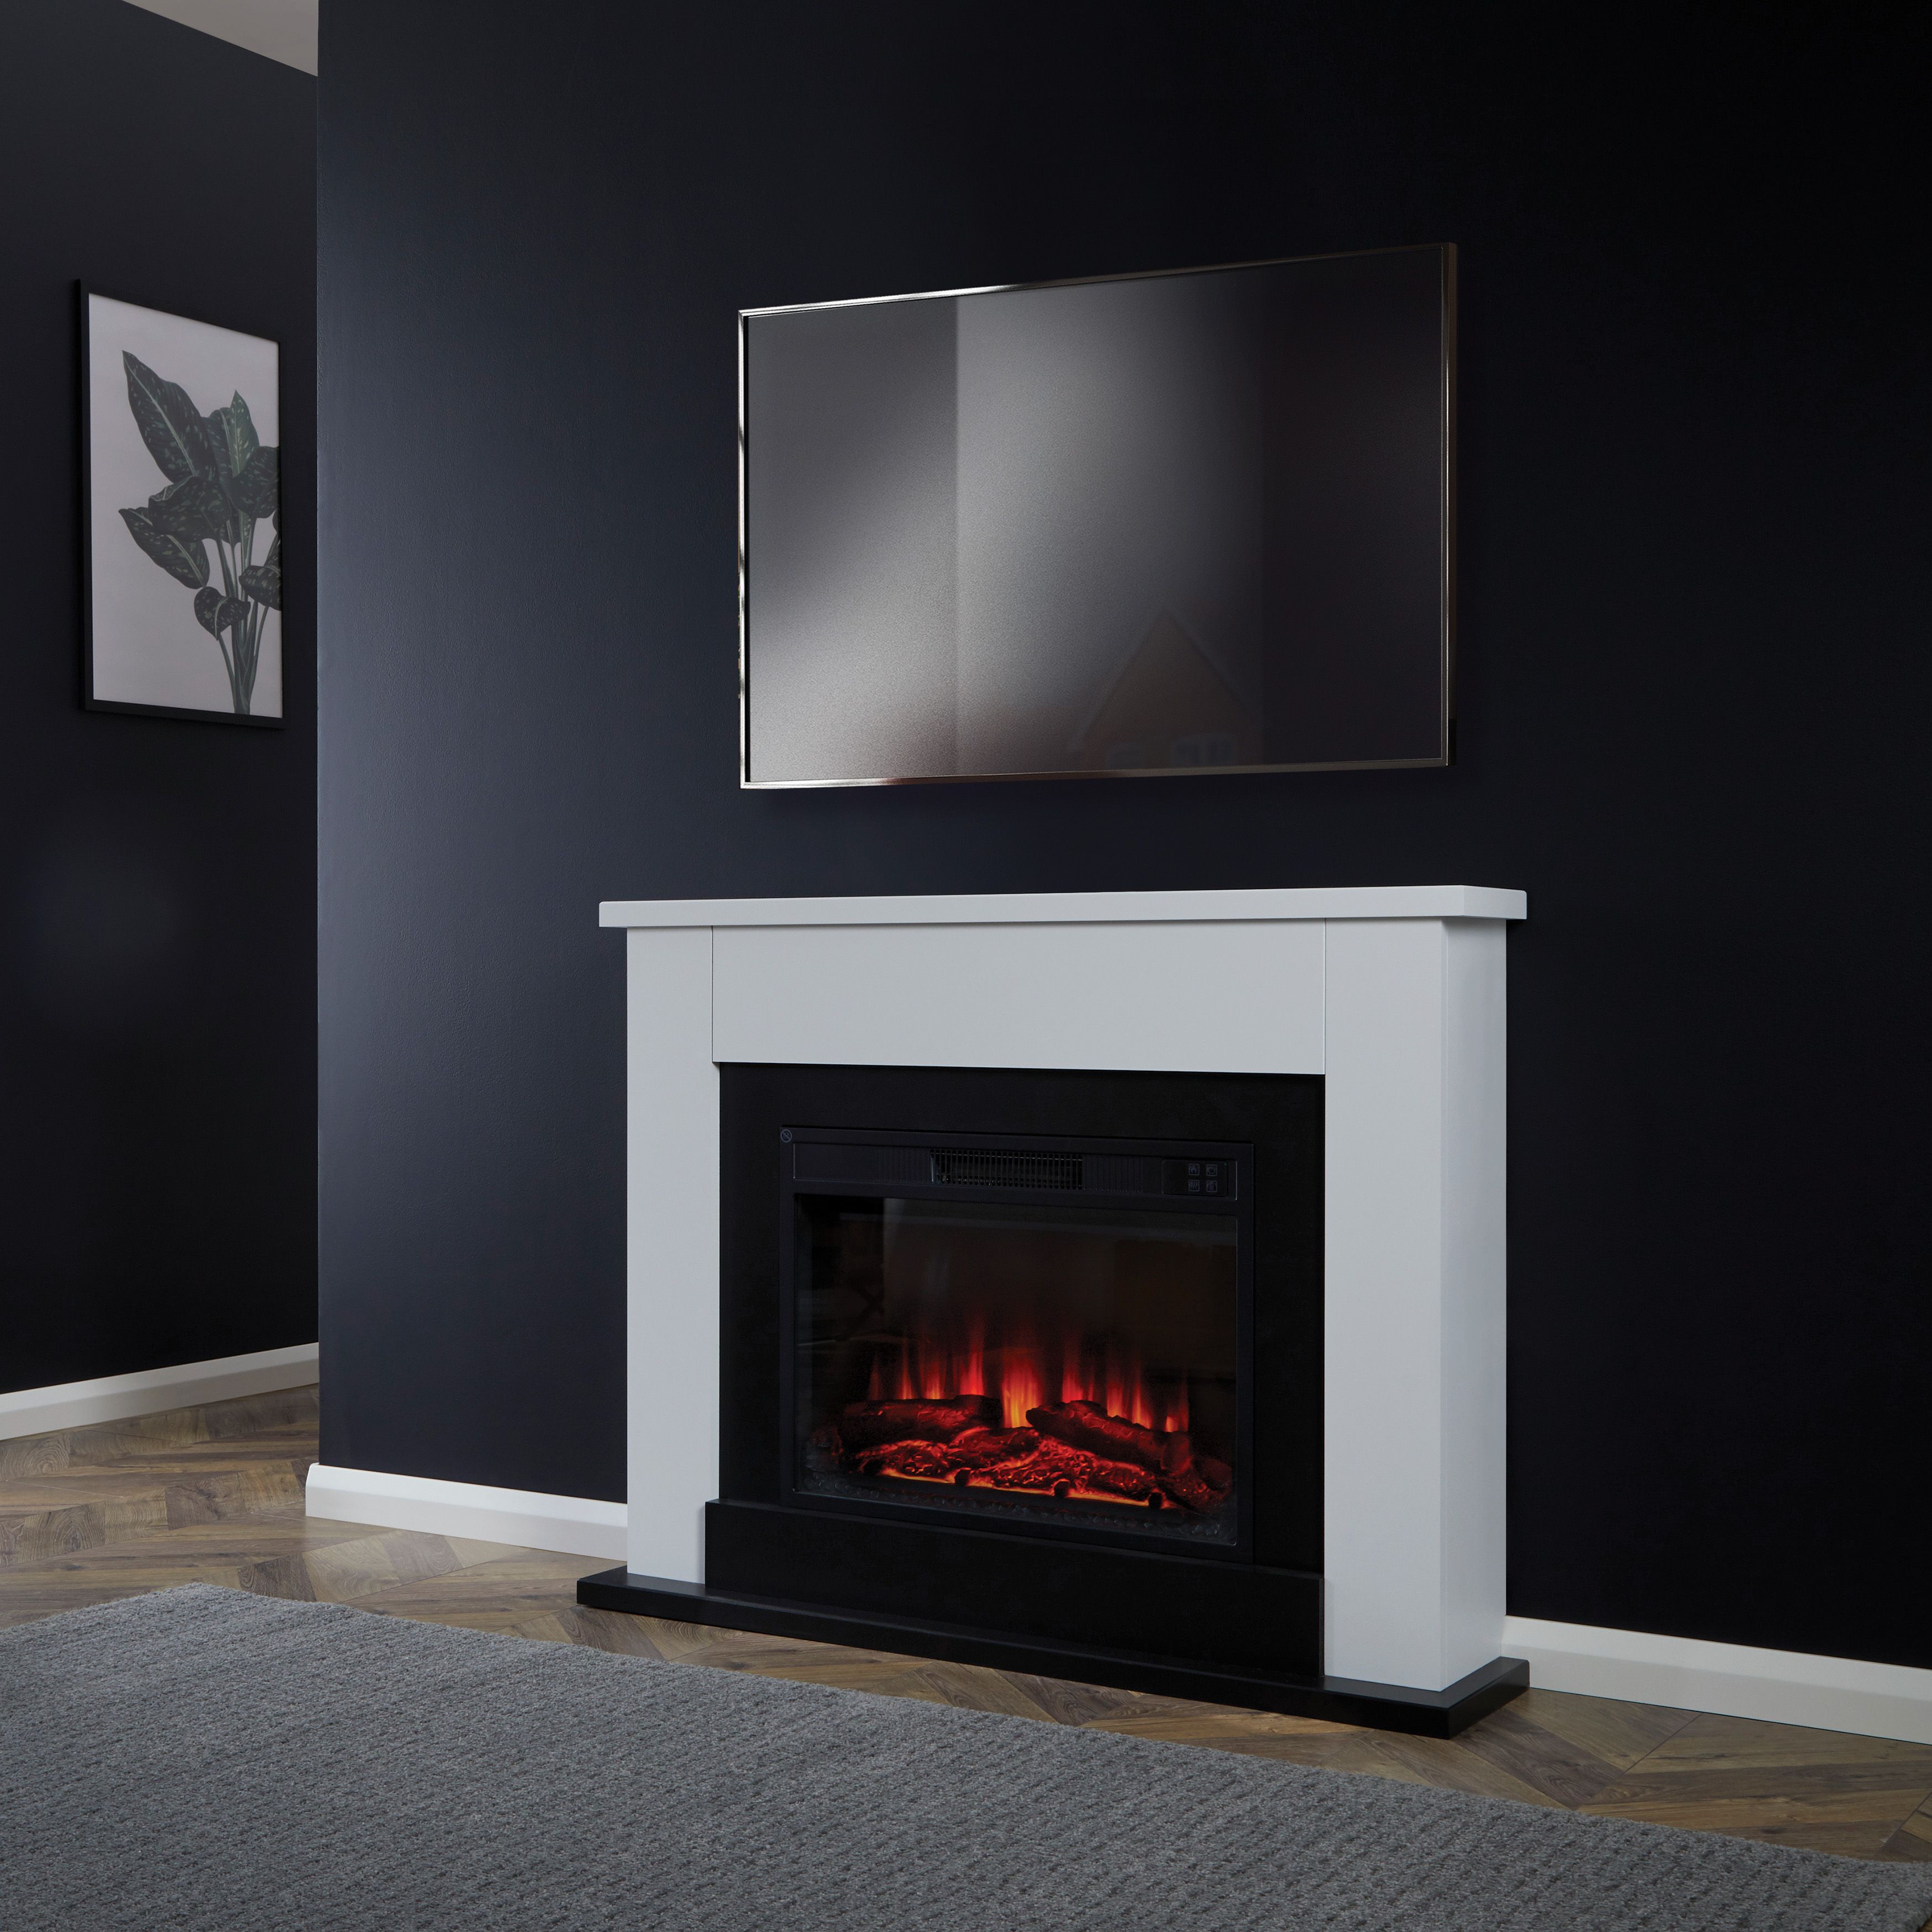 Suncrest Ryedale Black & white Textured stone effect Electric fire suite